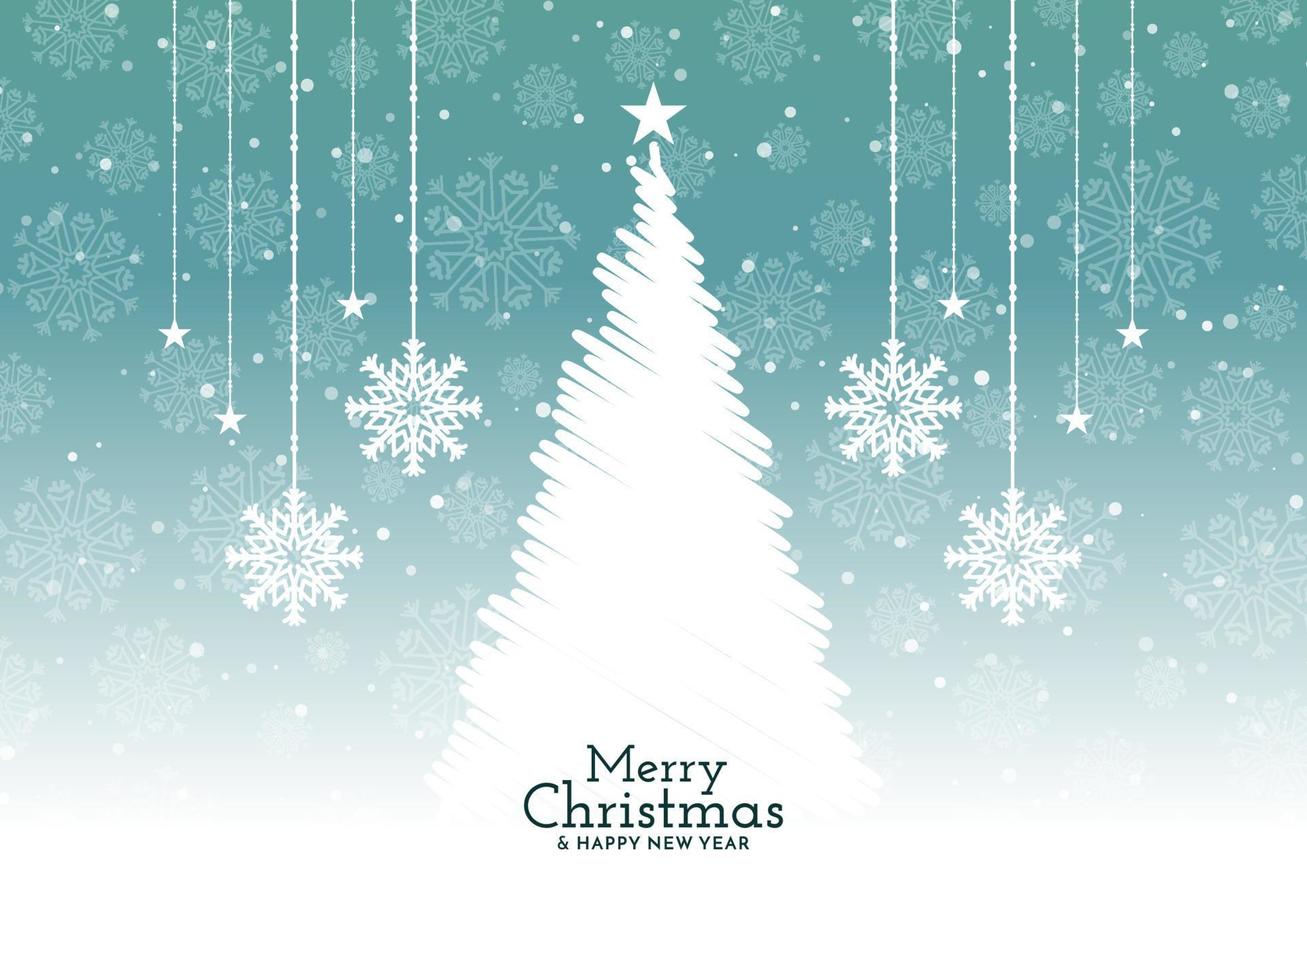 Merry Christmas festival greeting background with decorative tree vector